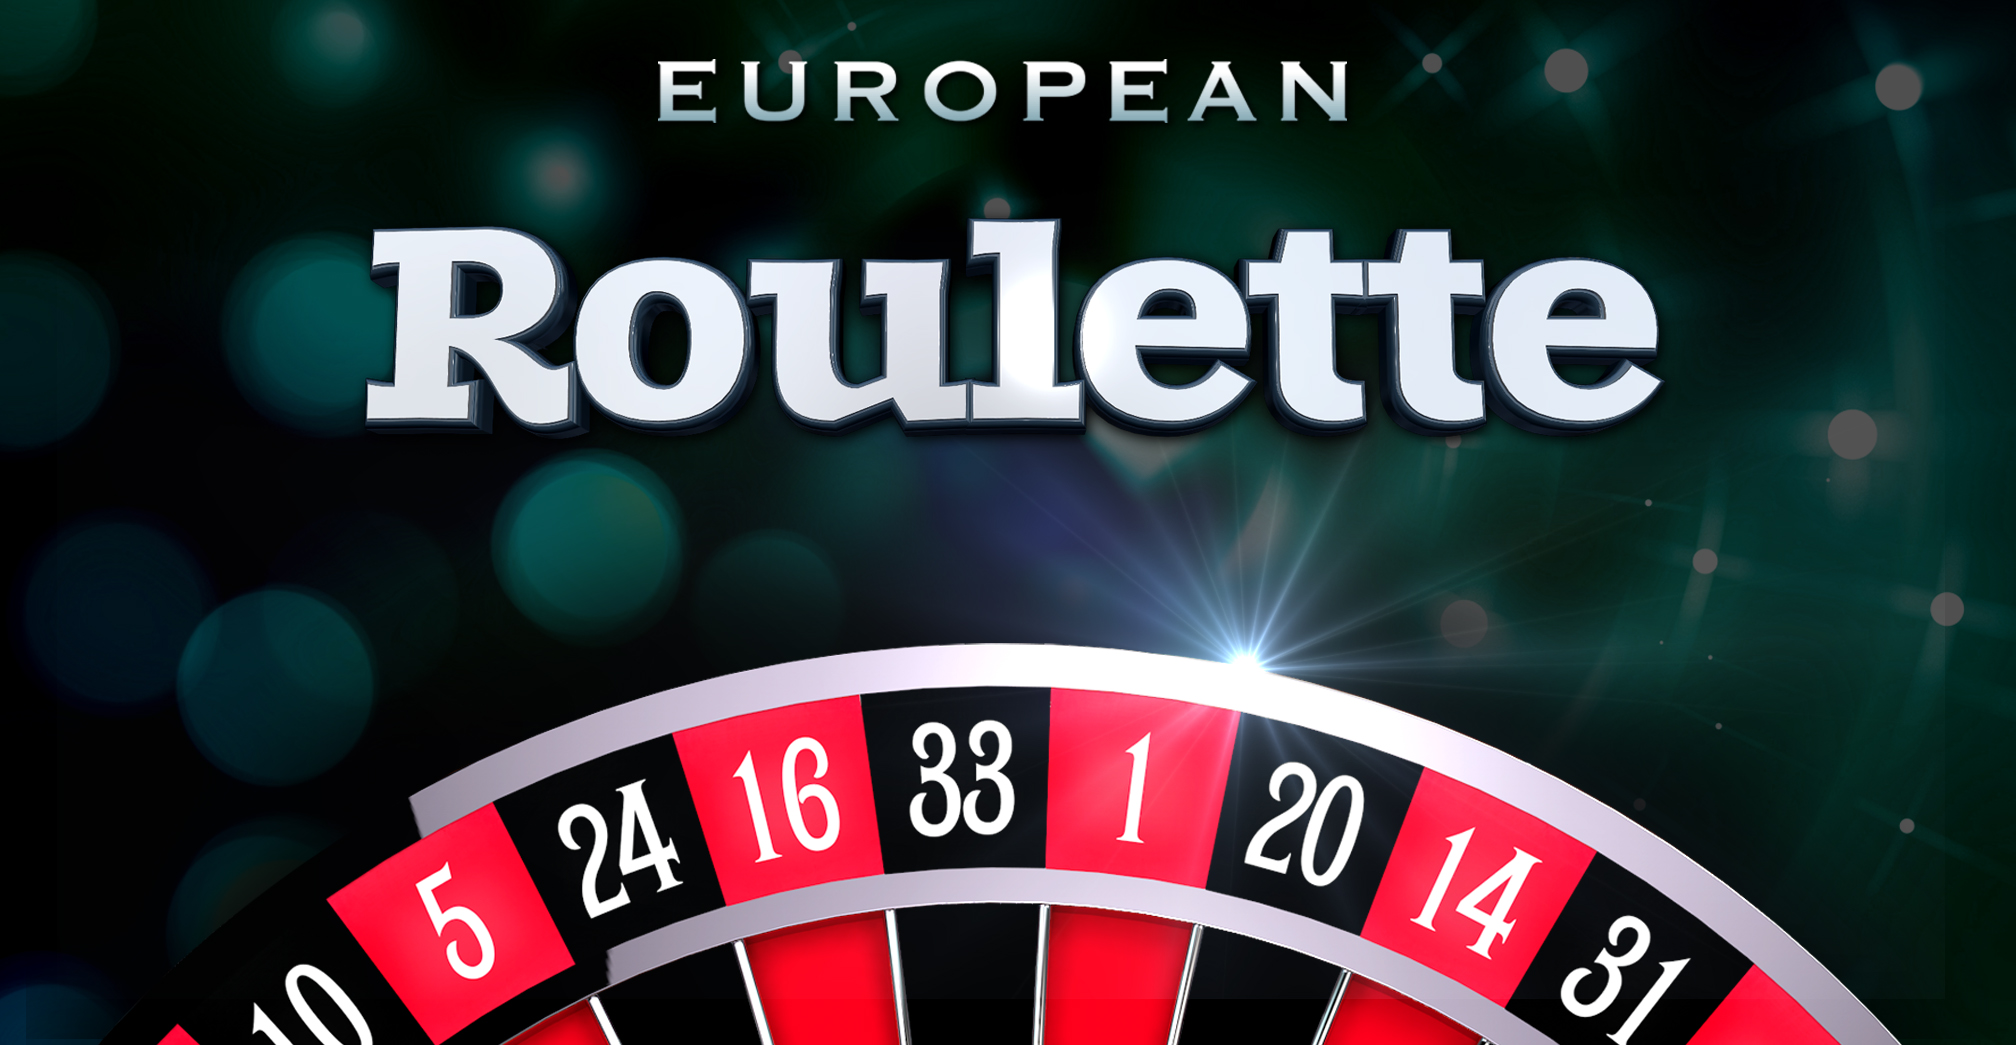 European Roulette - betFIRST by Gamevy is one of the most popular roulette casino games